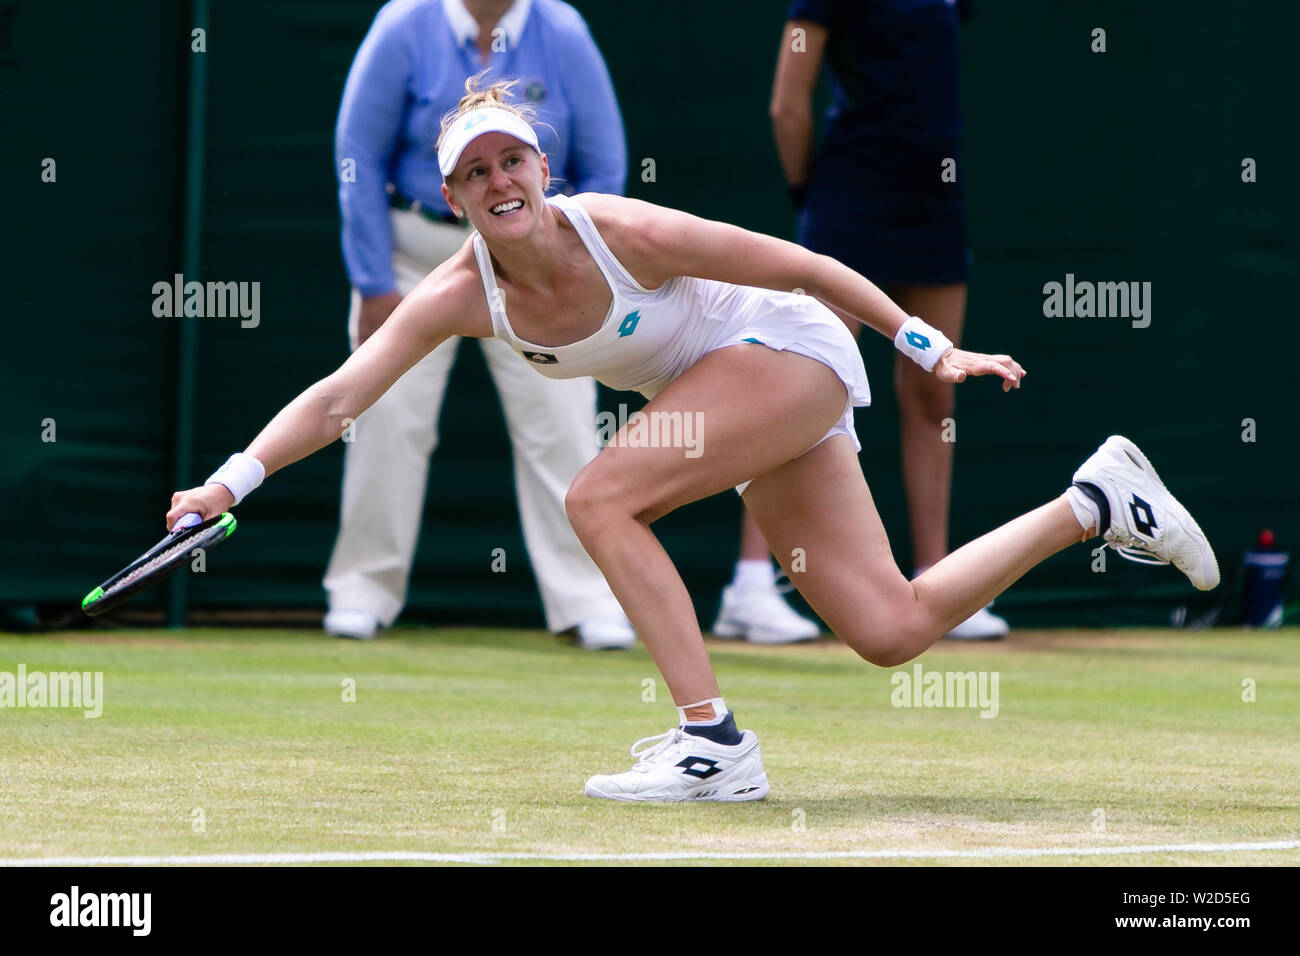 Alison riske wimbledon hi-res stock photography and images - Alamy